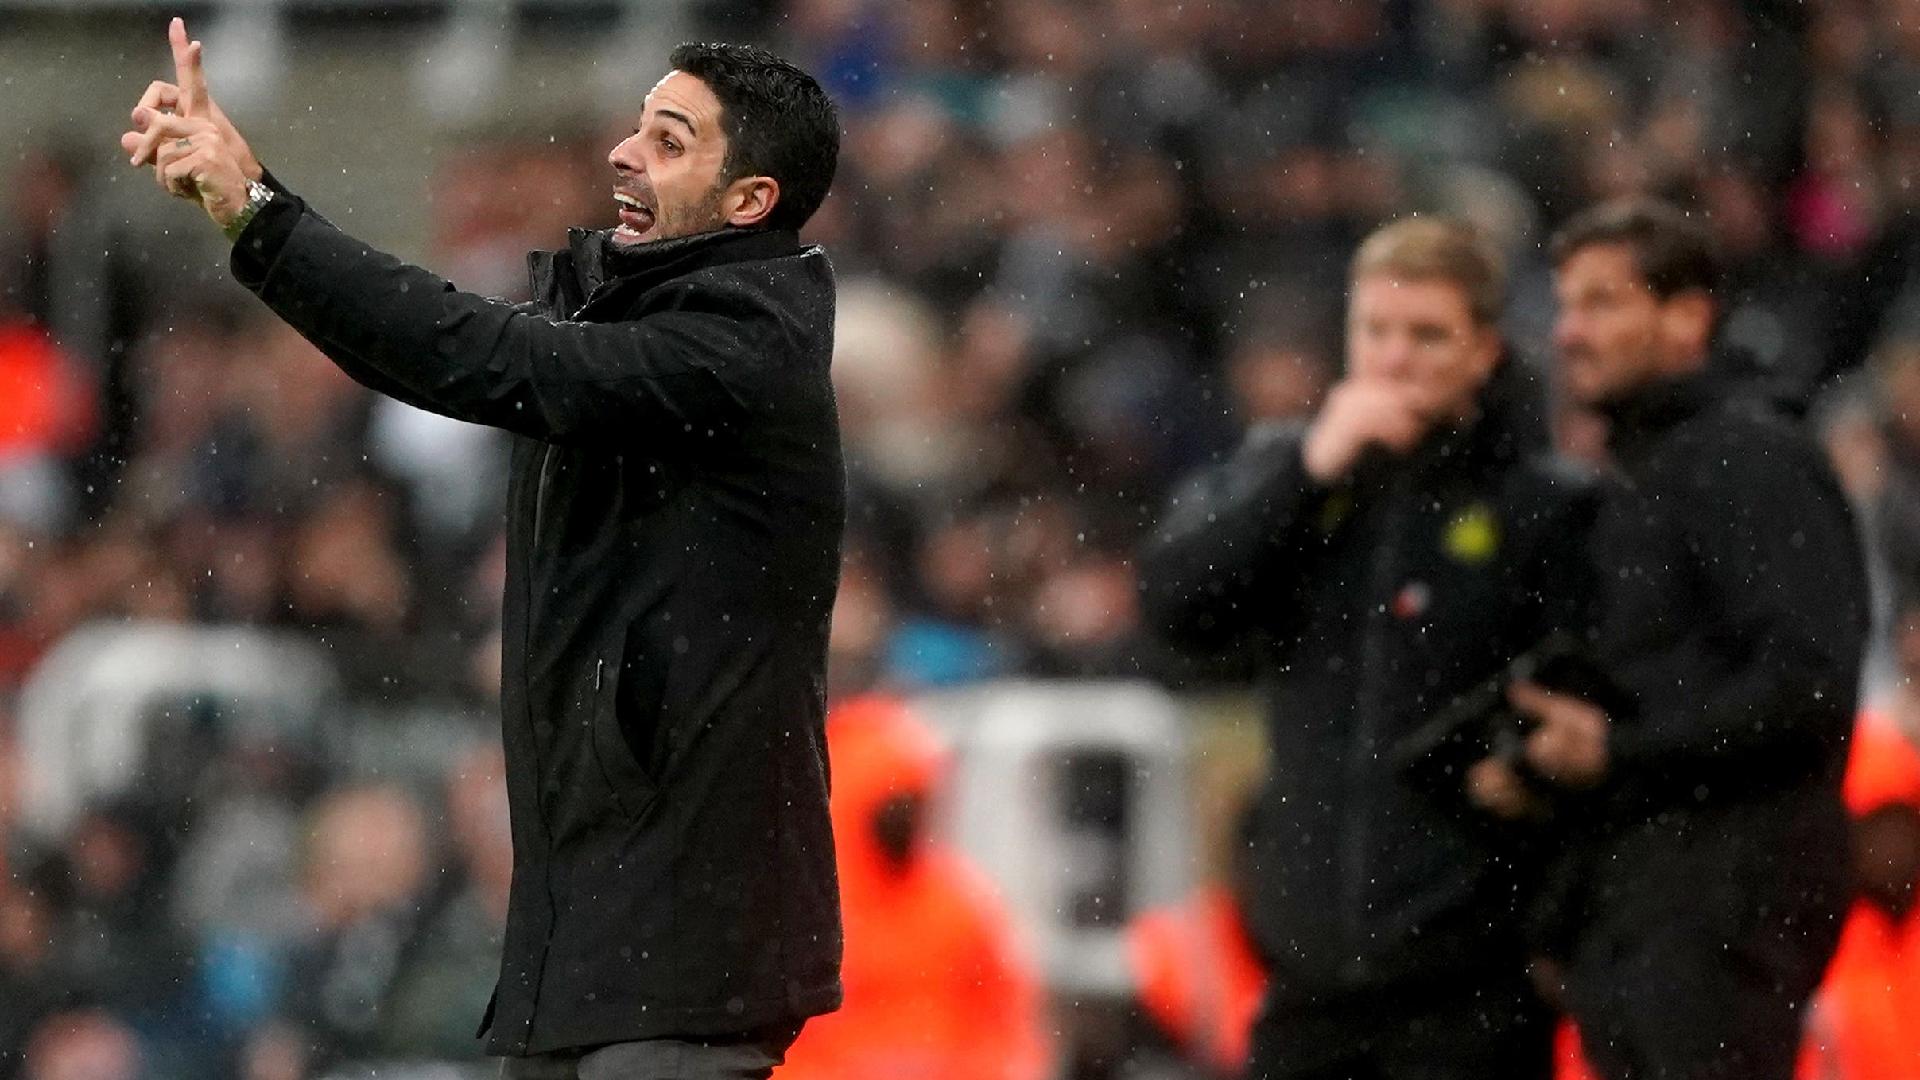 Mikel Arteta believes refereeing has improved since his outburst at Newcastle